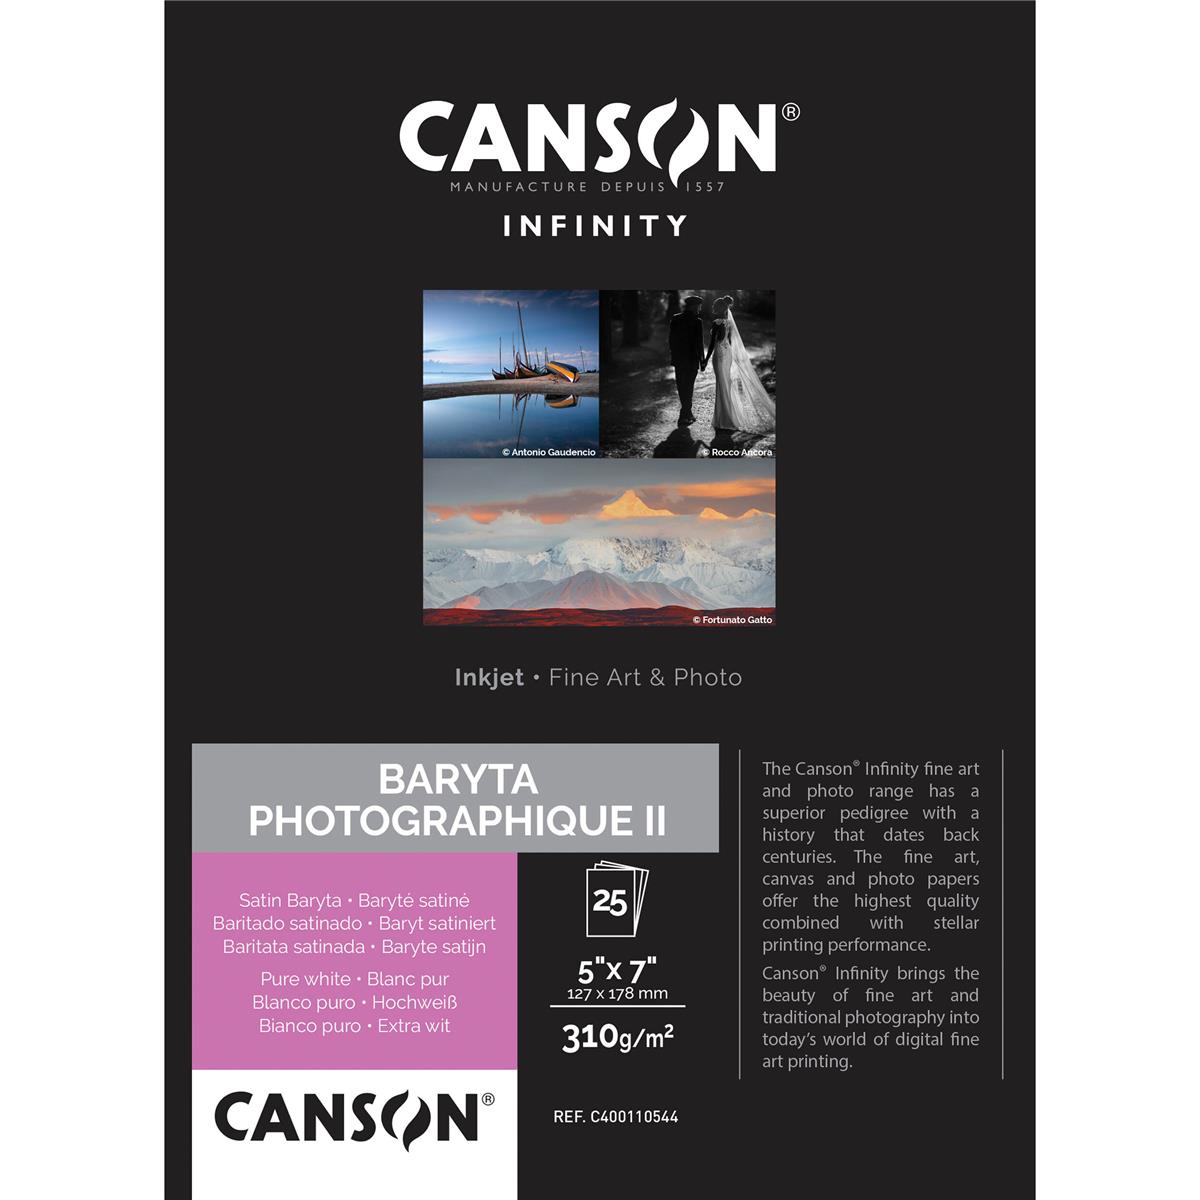 Image of Canson Infinity Baryta Photographique II 310gsm Paper